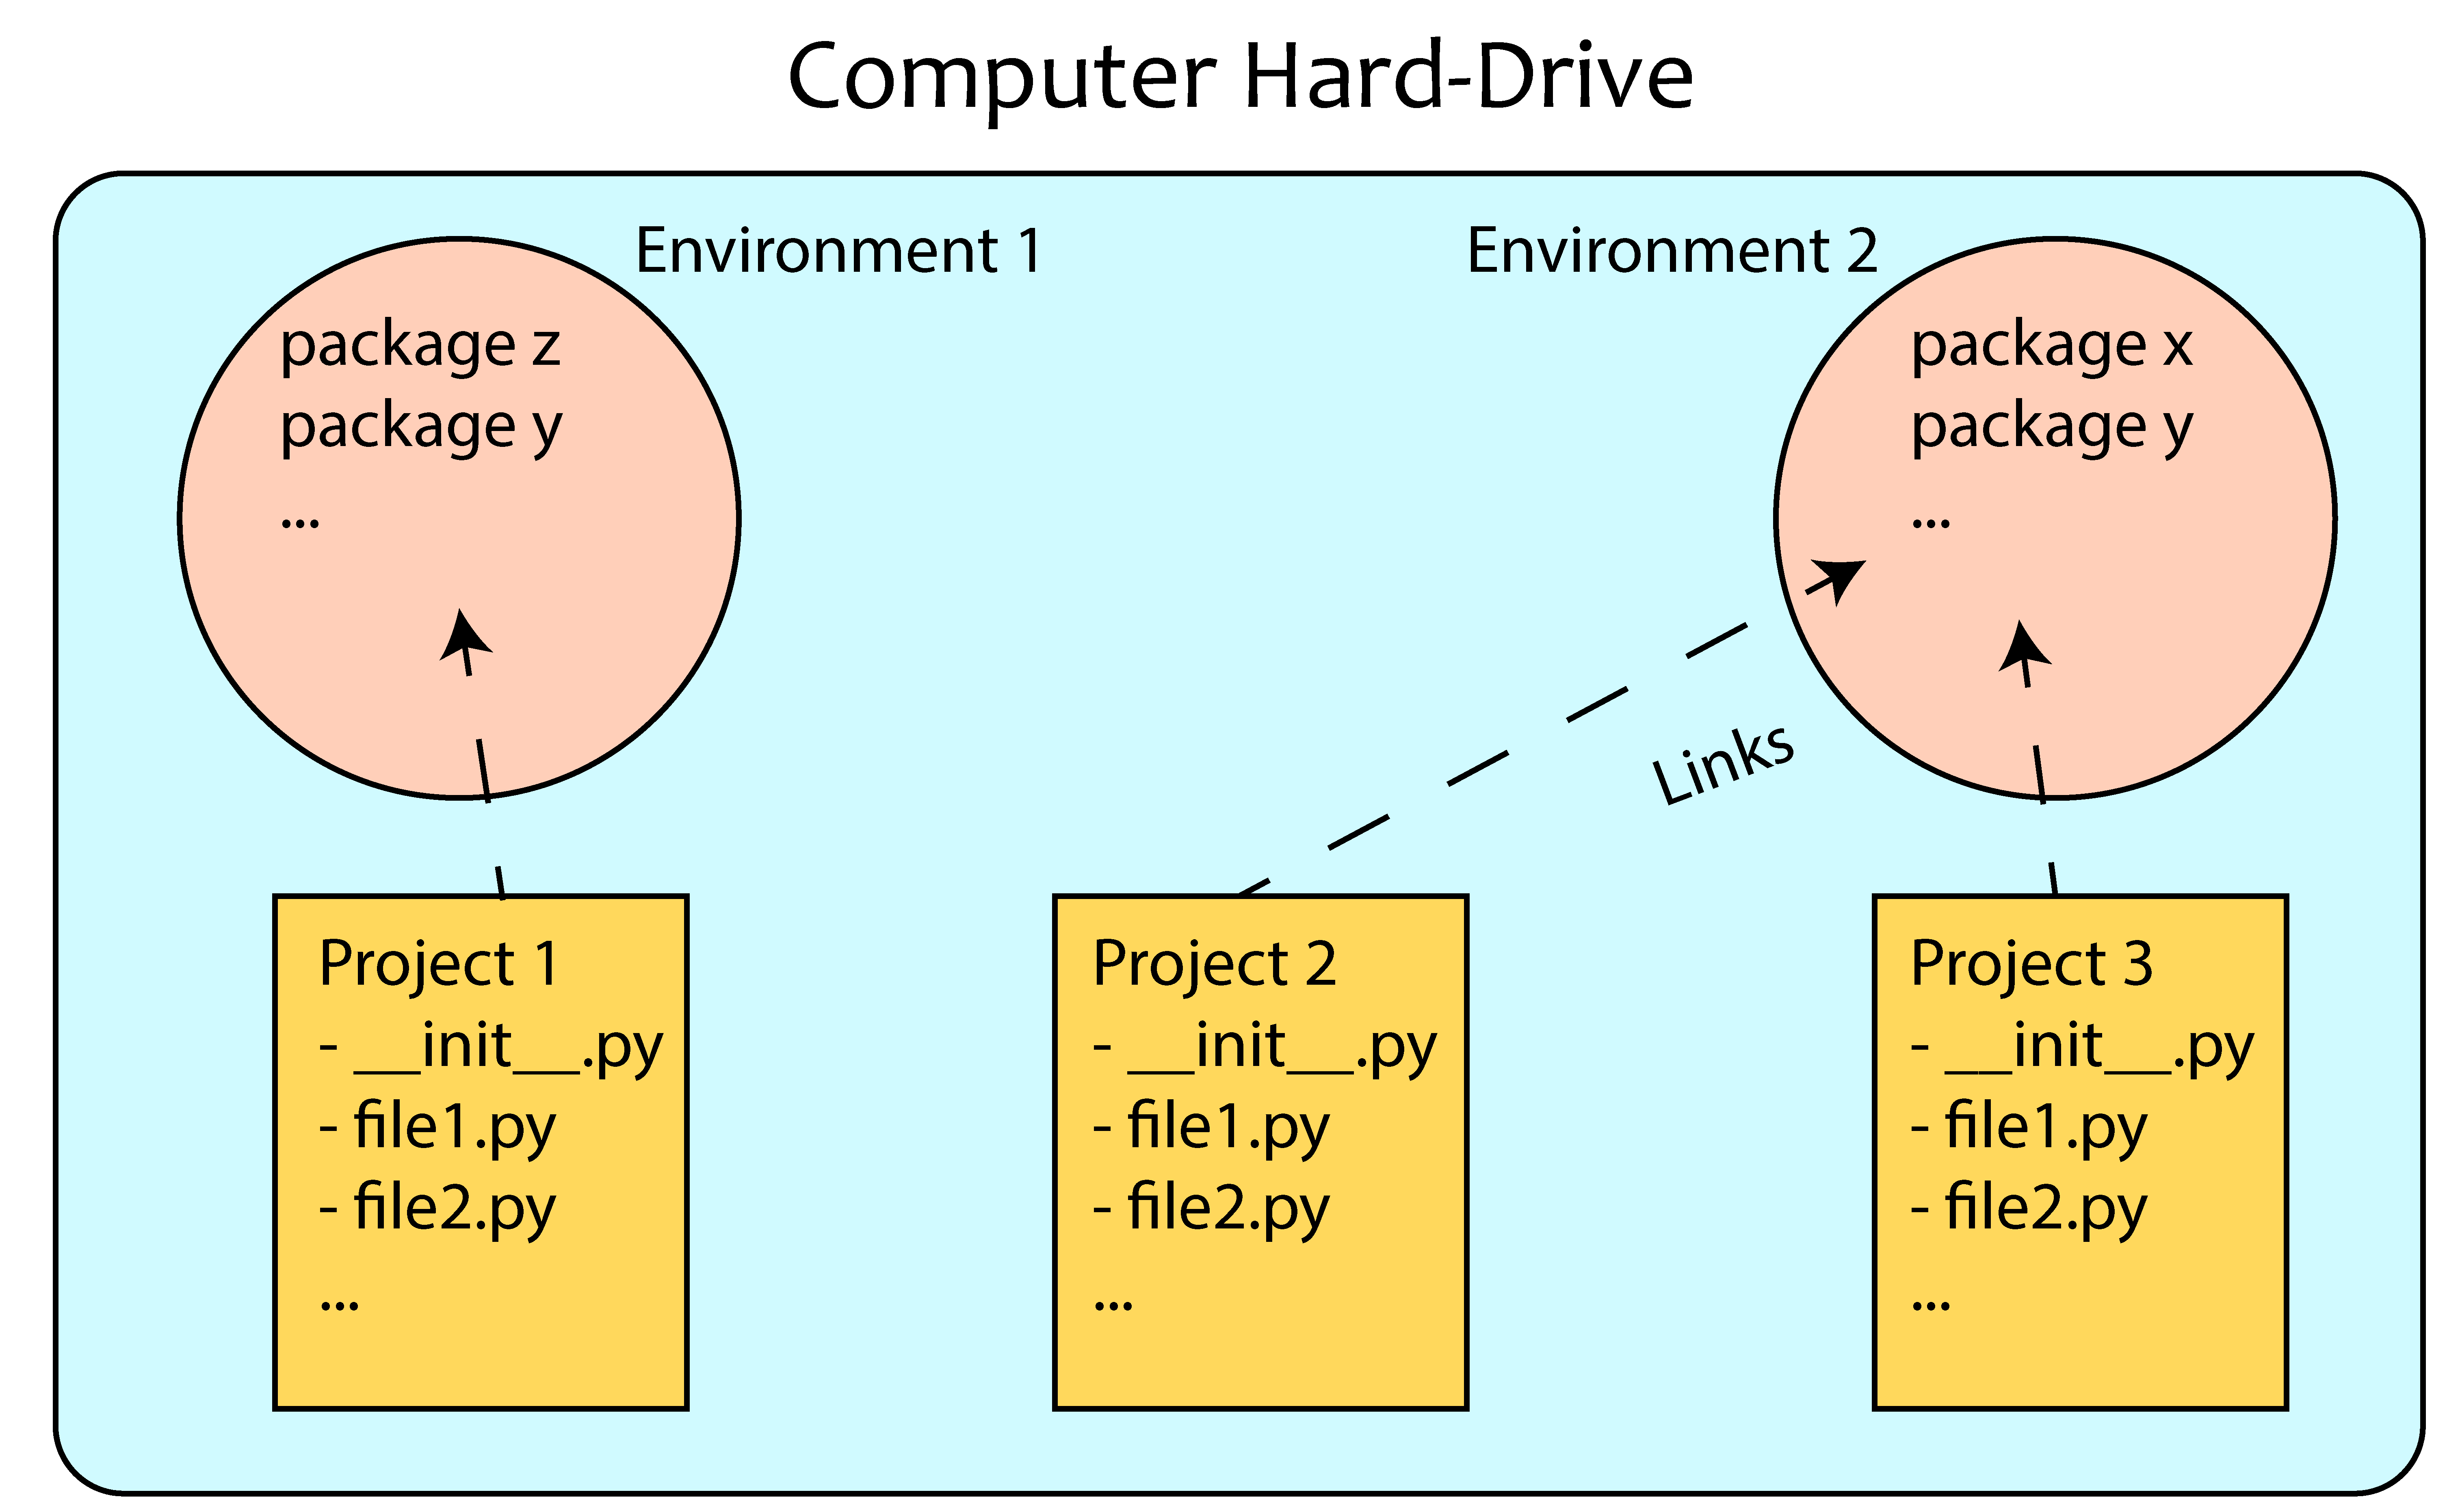 Summary of environments and namespaces